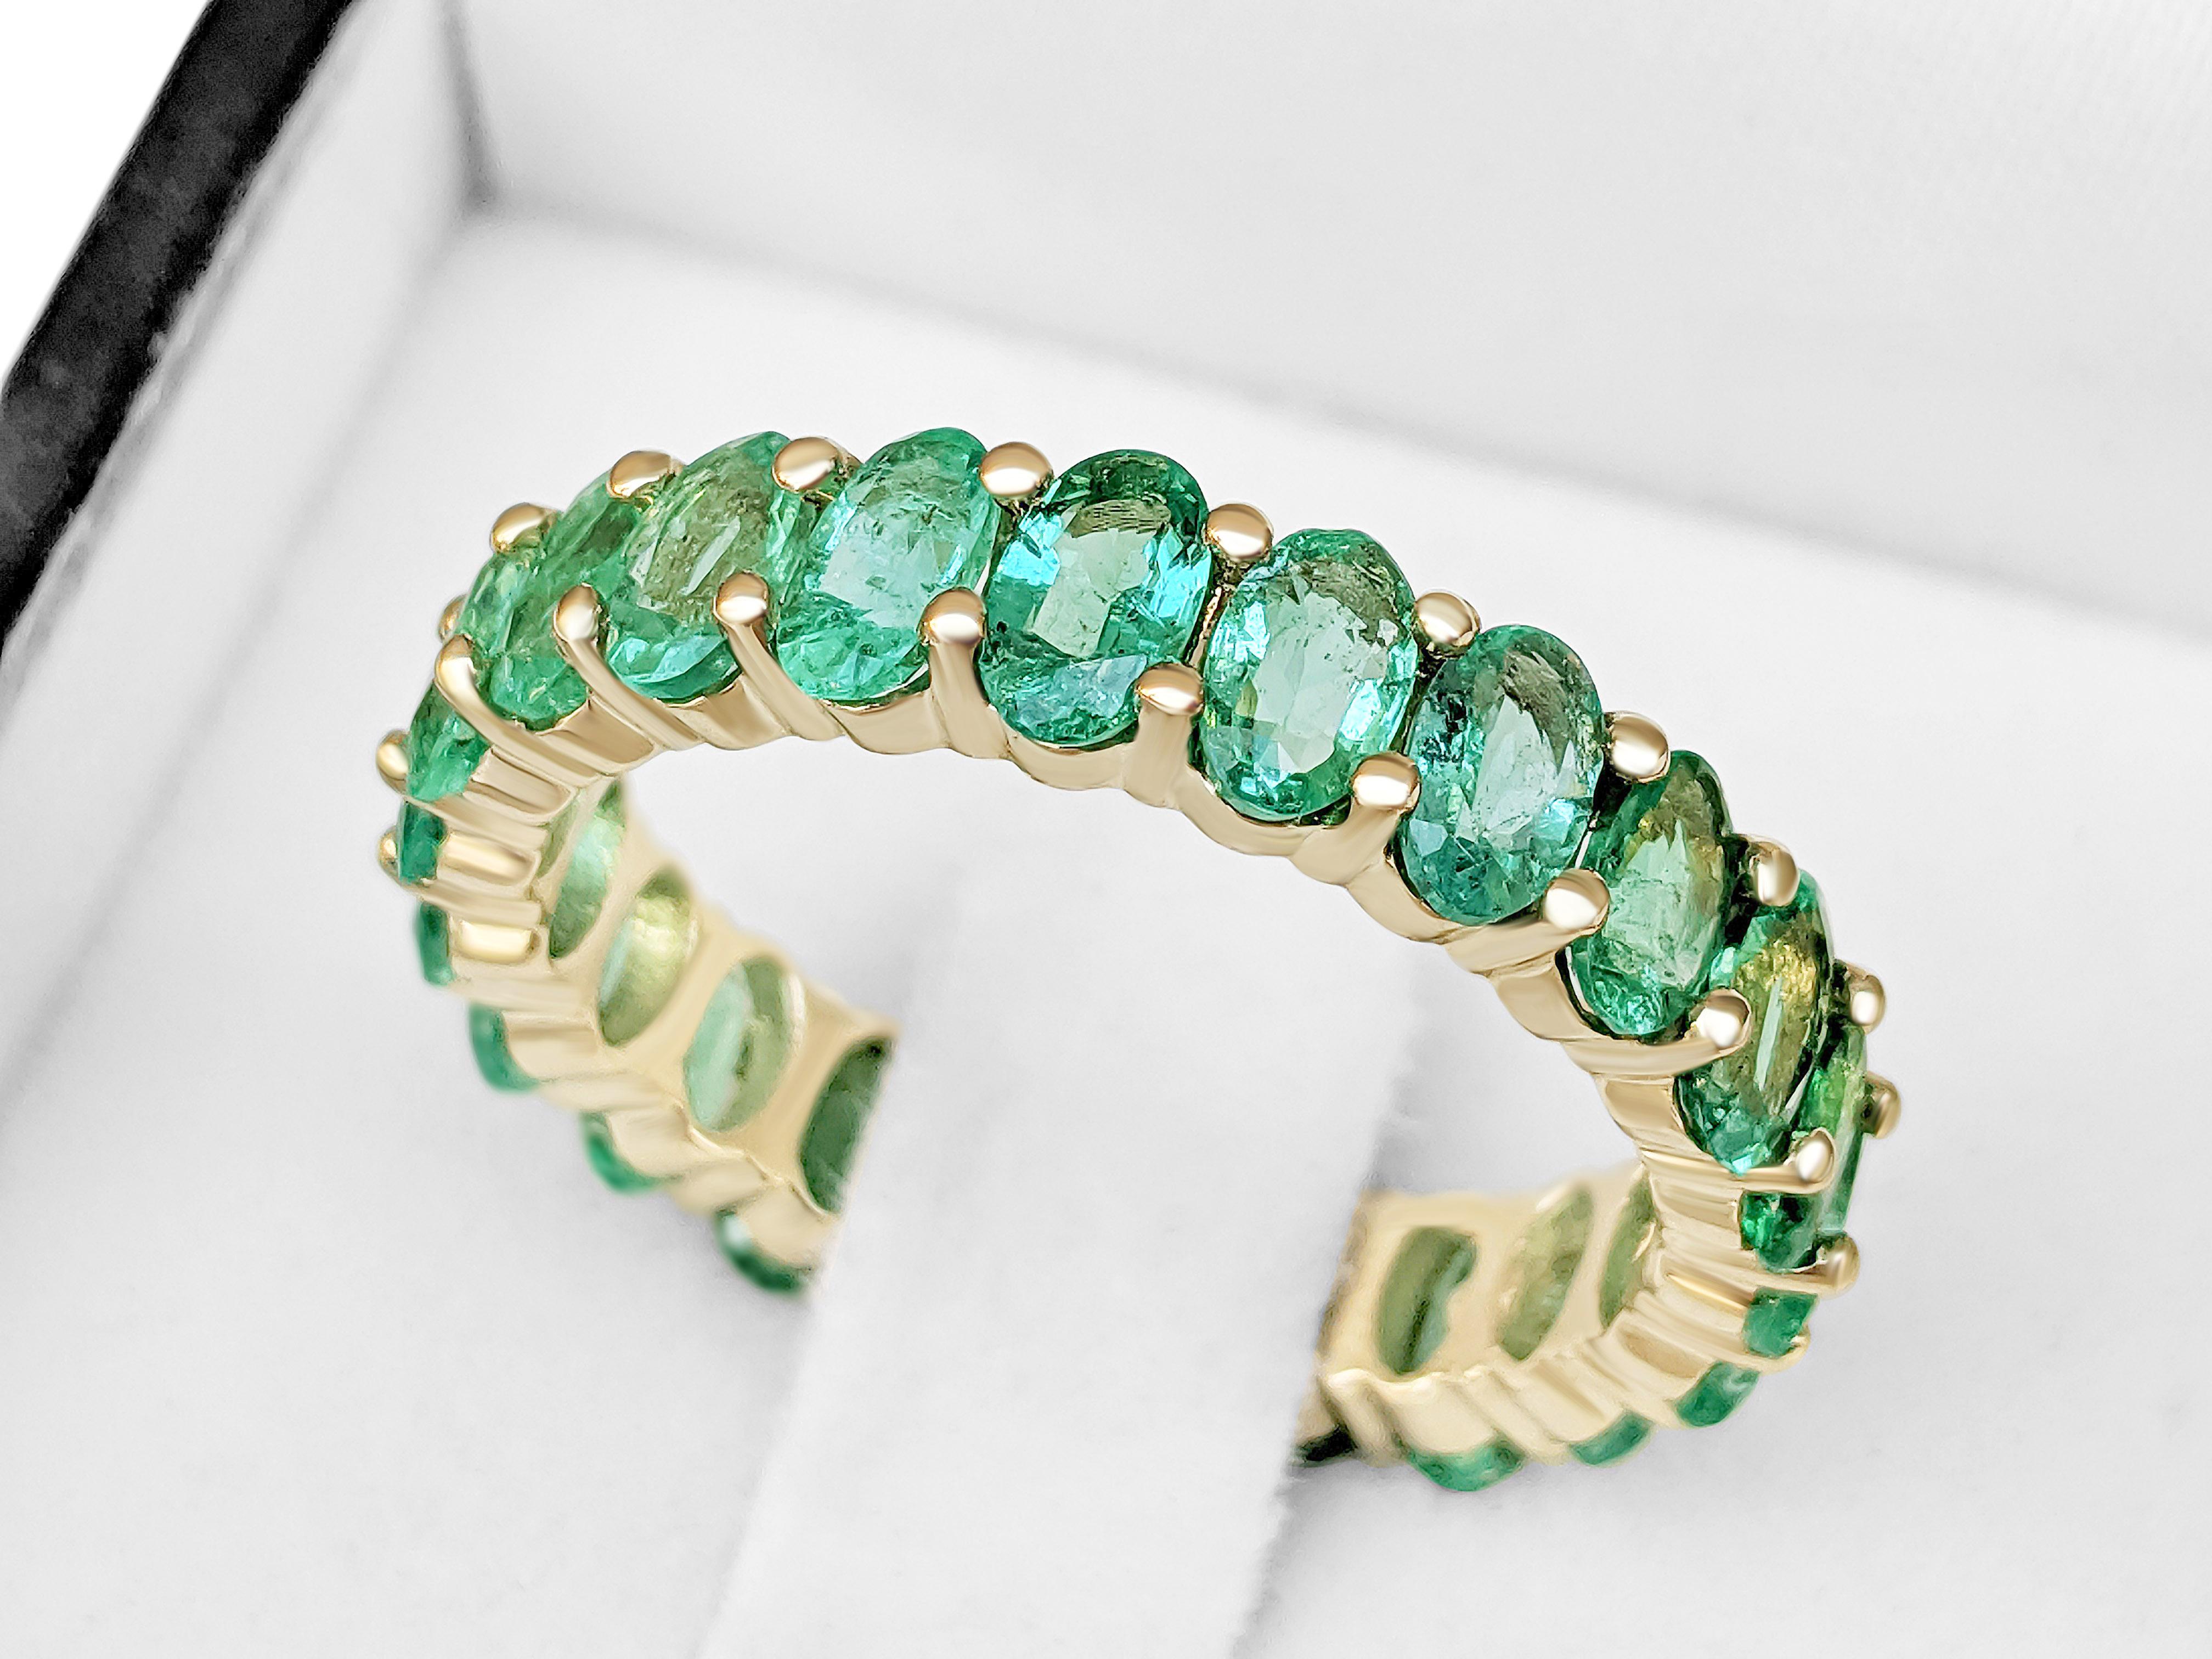 Oval Cut $1 NO RESERVE!   4.38cttw Natural Emeralds Eternity Band - 14k Yellow Gold